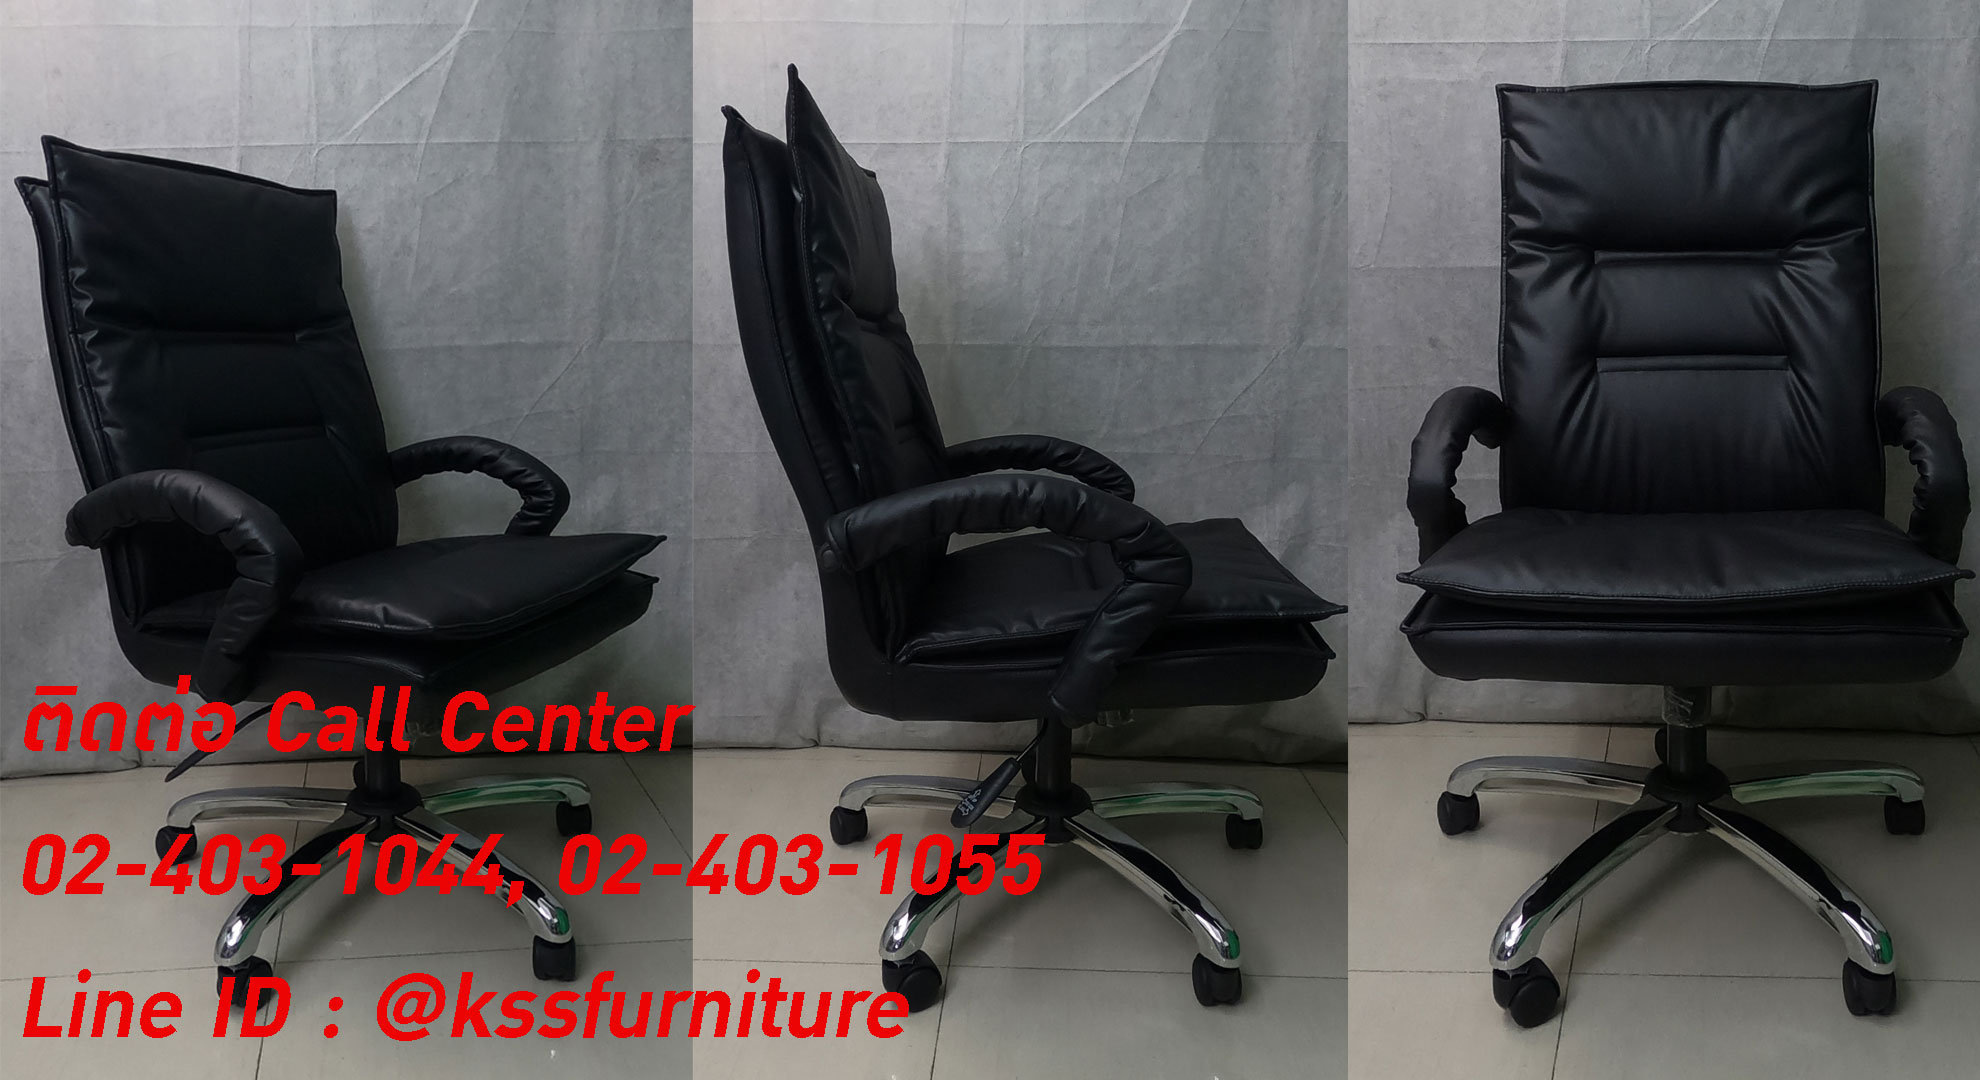 72032::SK018M-C::A Chawin office chair with PVC leather seat, tilting backrest and gas-lift adjustable. Dimension (WxDxH) cm : 62x57x100-110